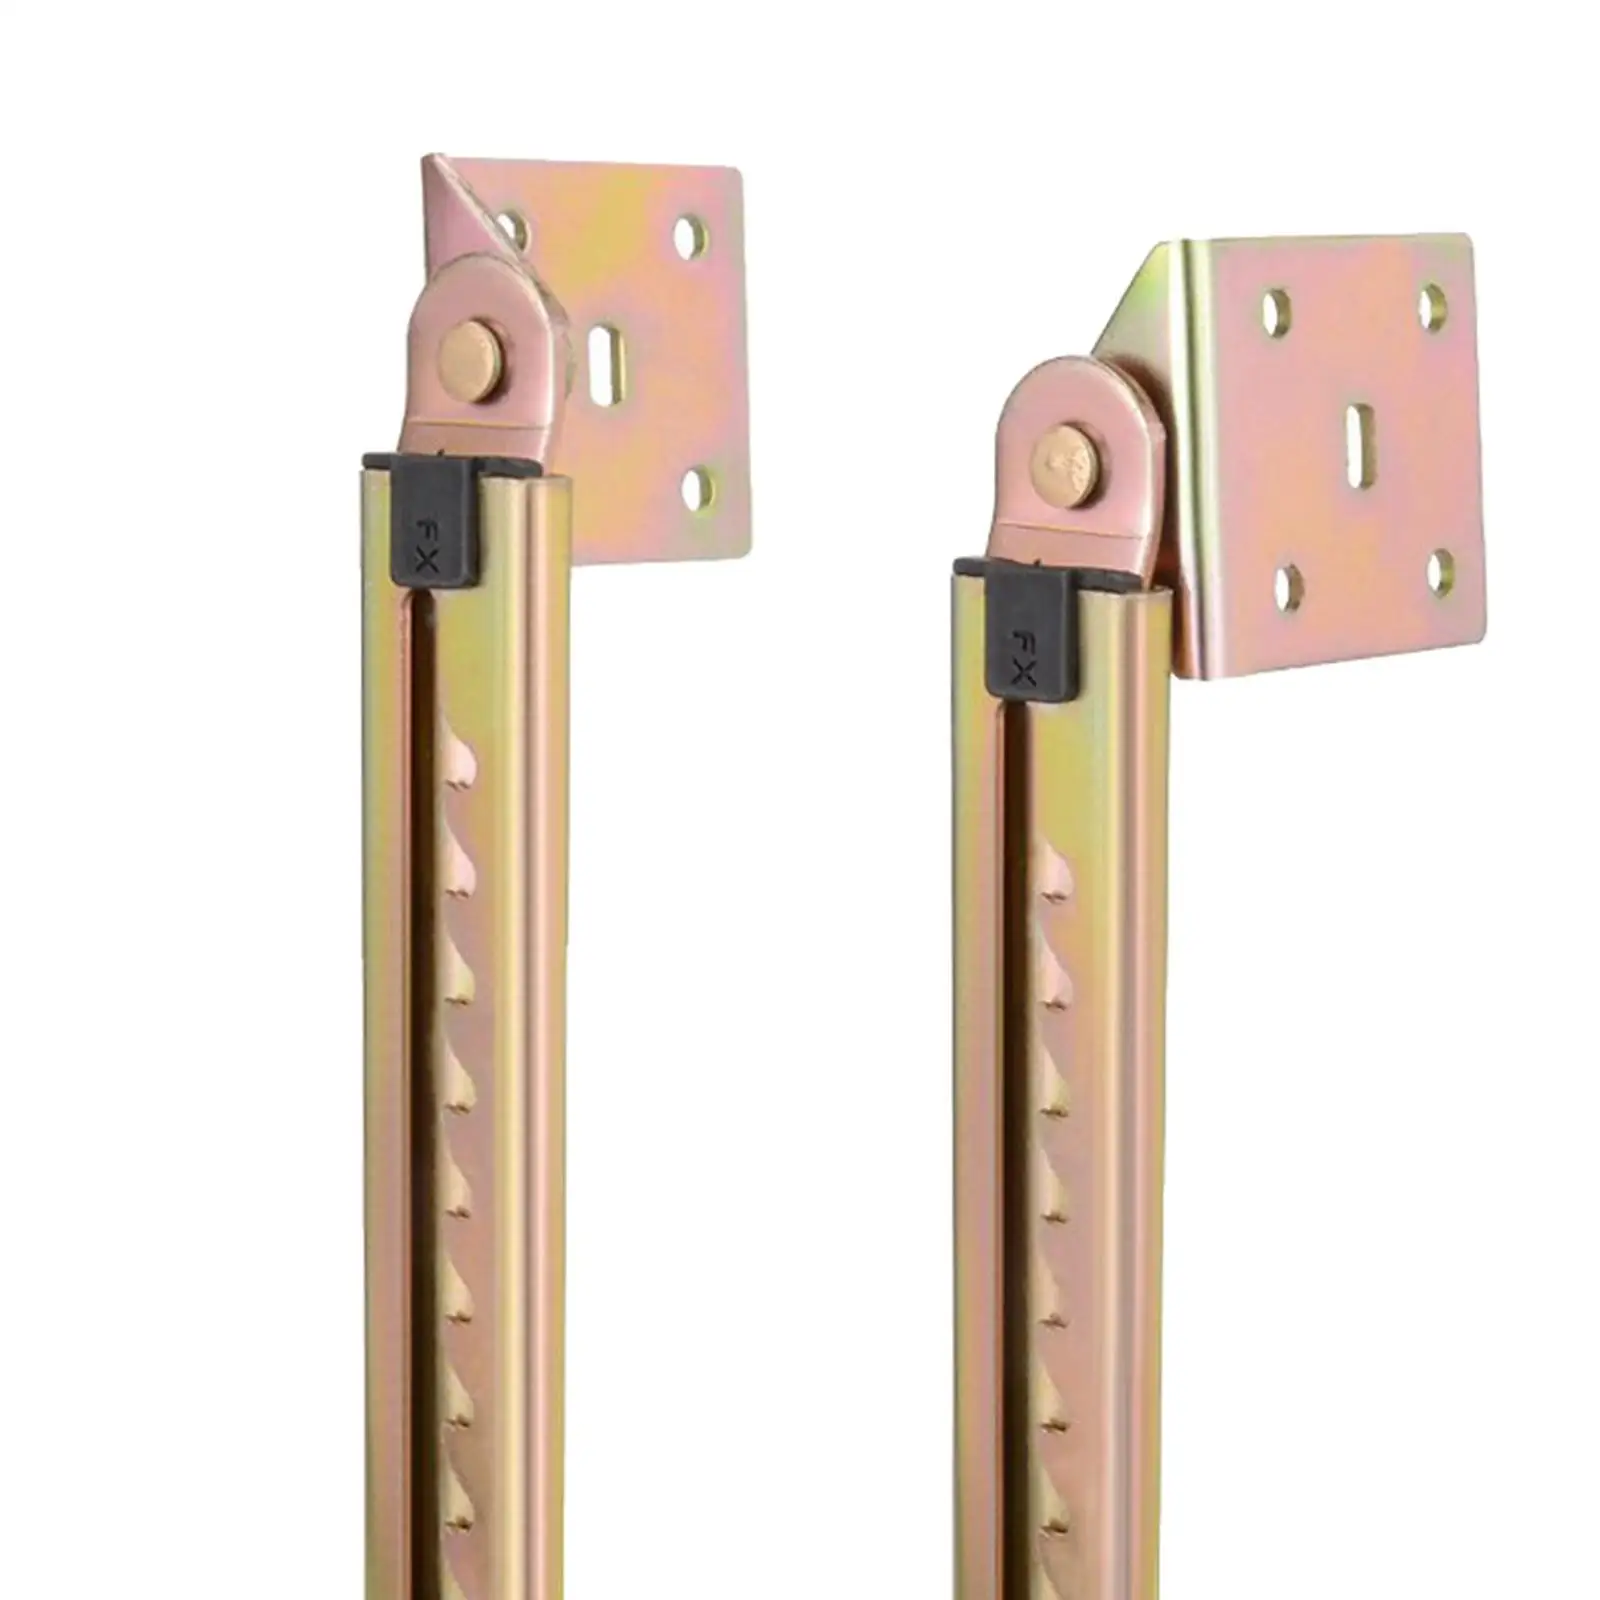 iron Angle Lifting Rod Angle Hinge Adjustable, Pneumatic Support for Bed